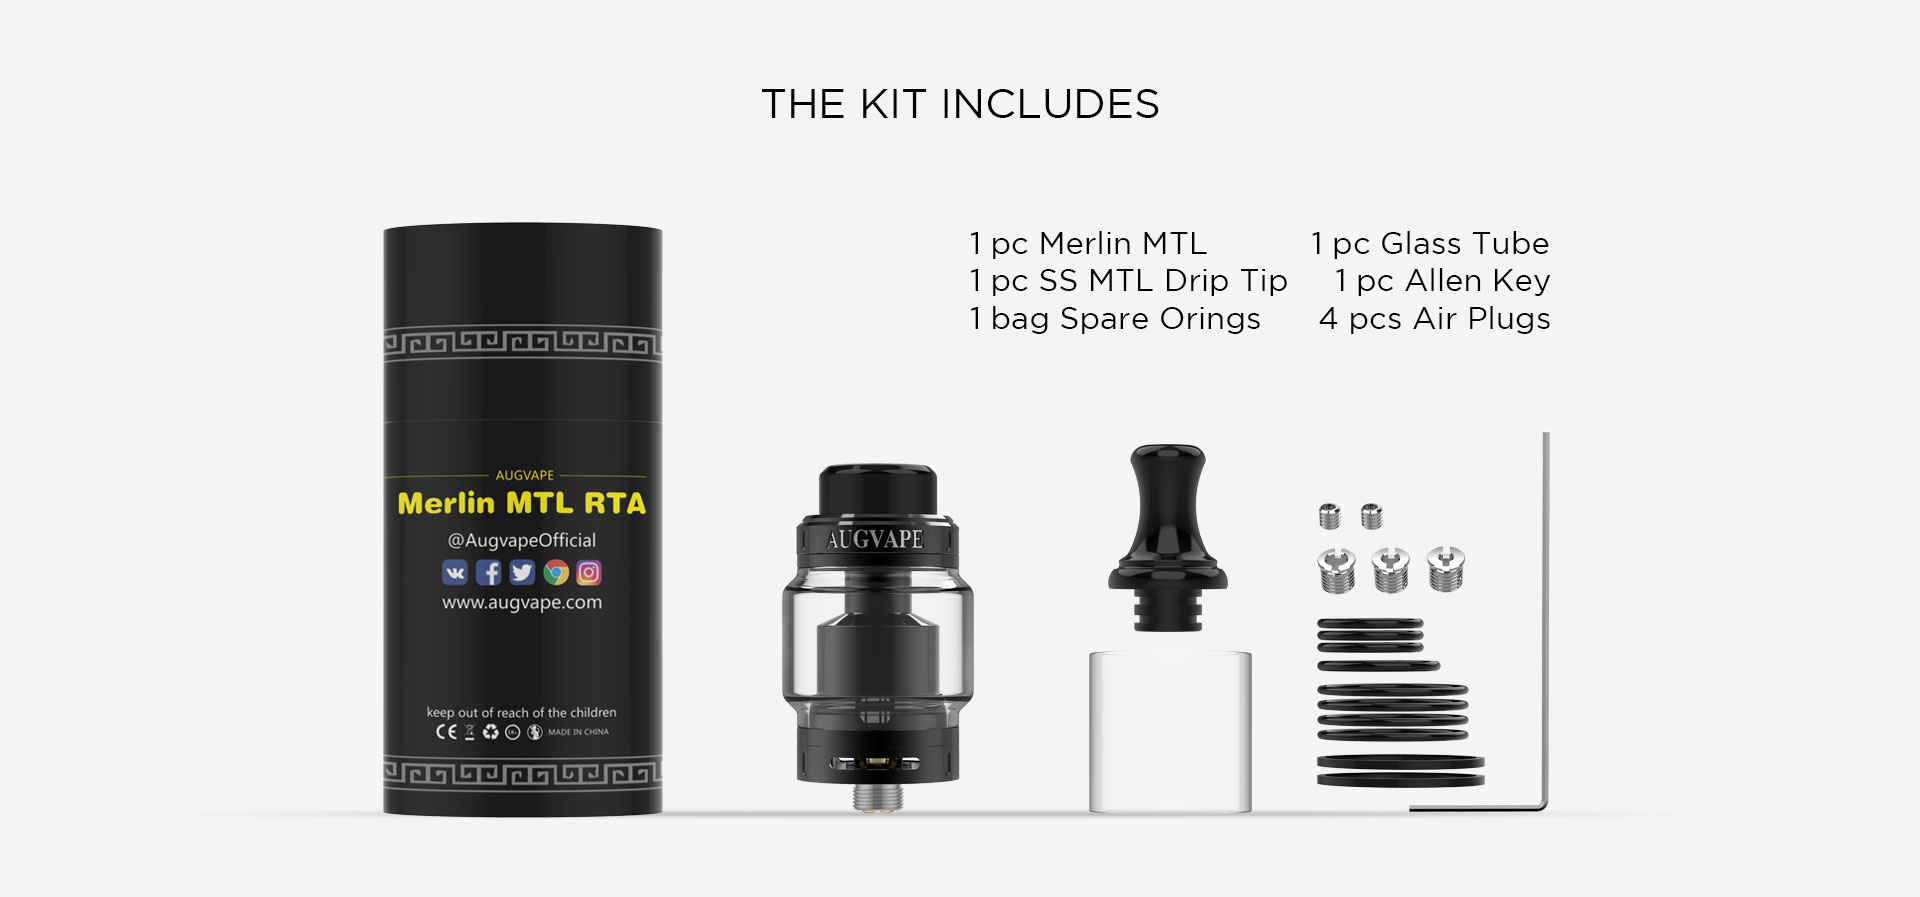 22mm diameter mouth to lung rta